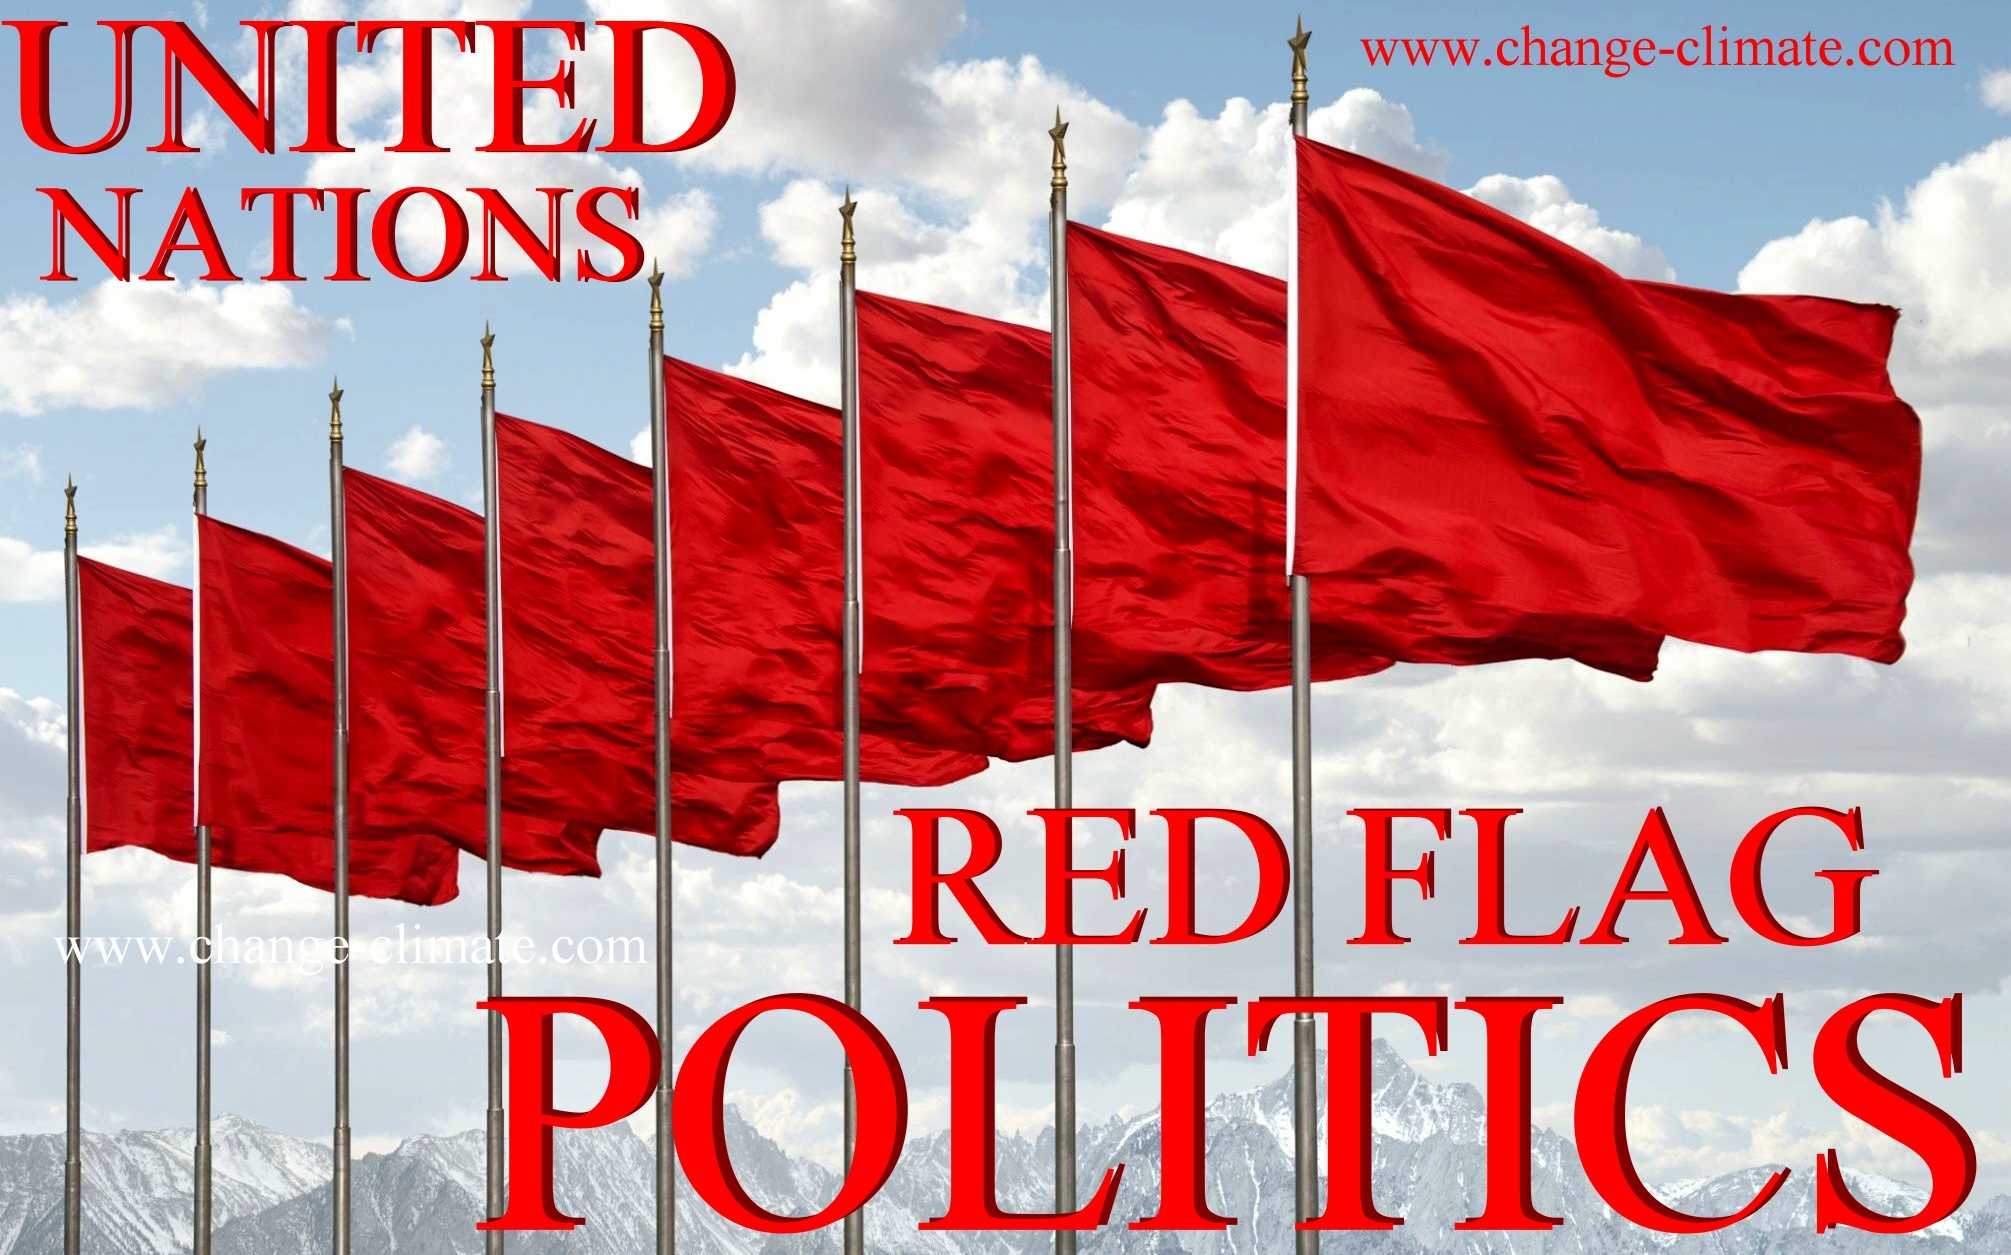 Red flag corruption in politics and policy making